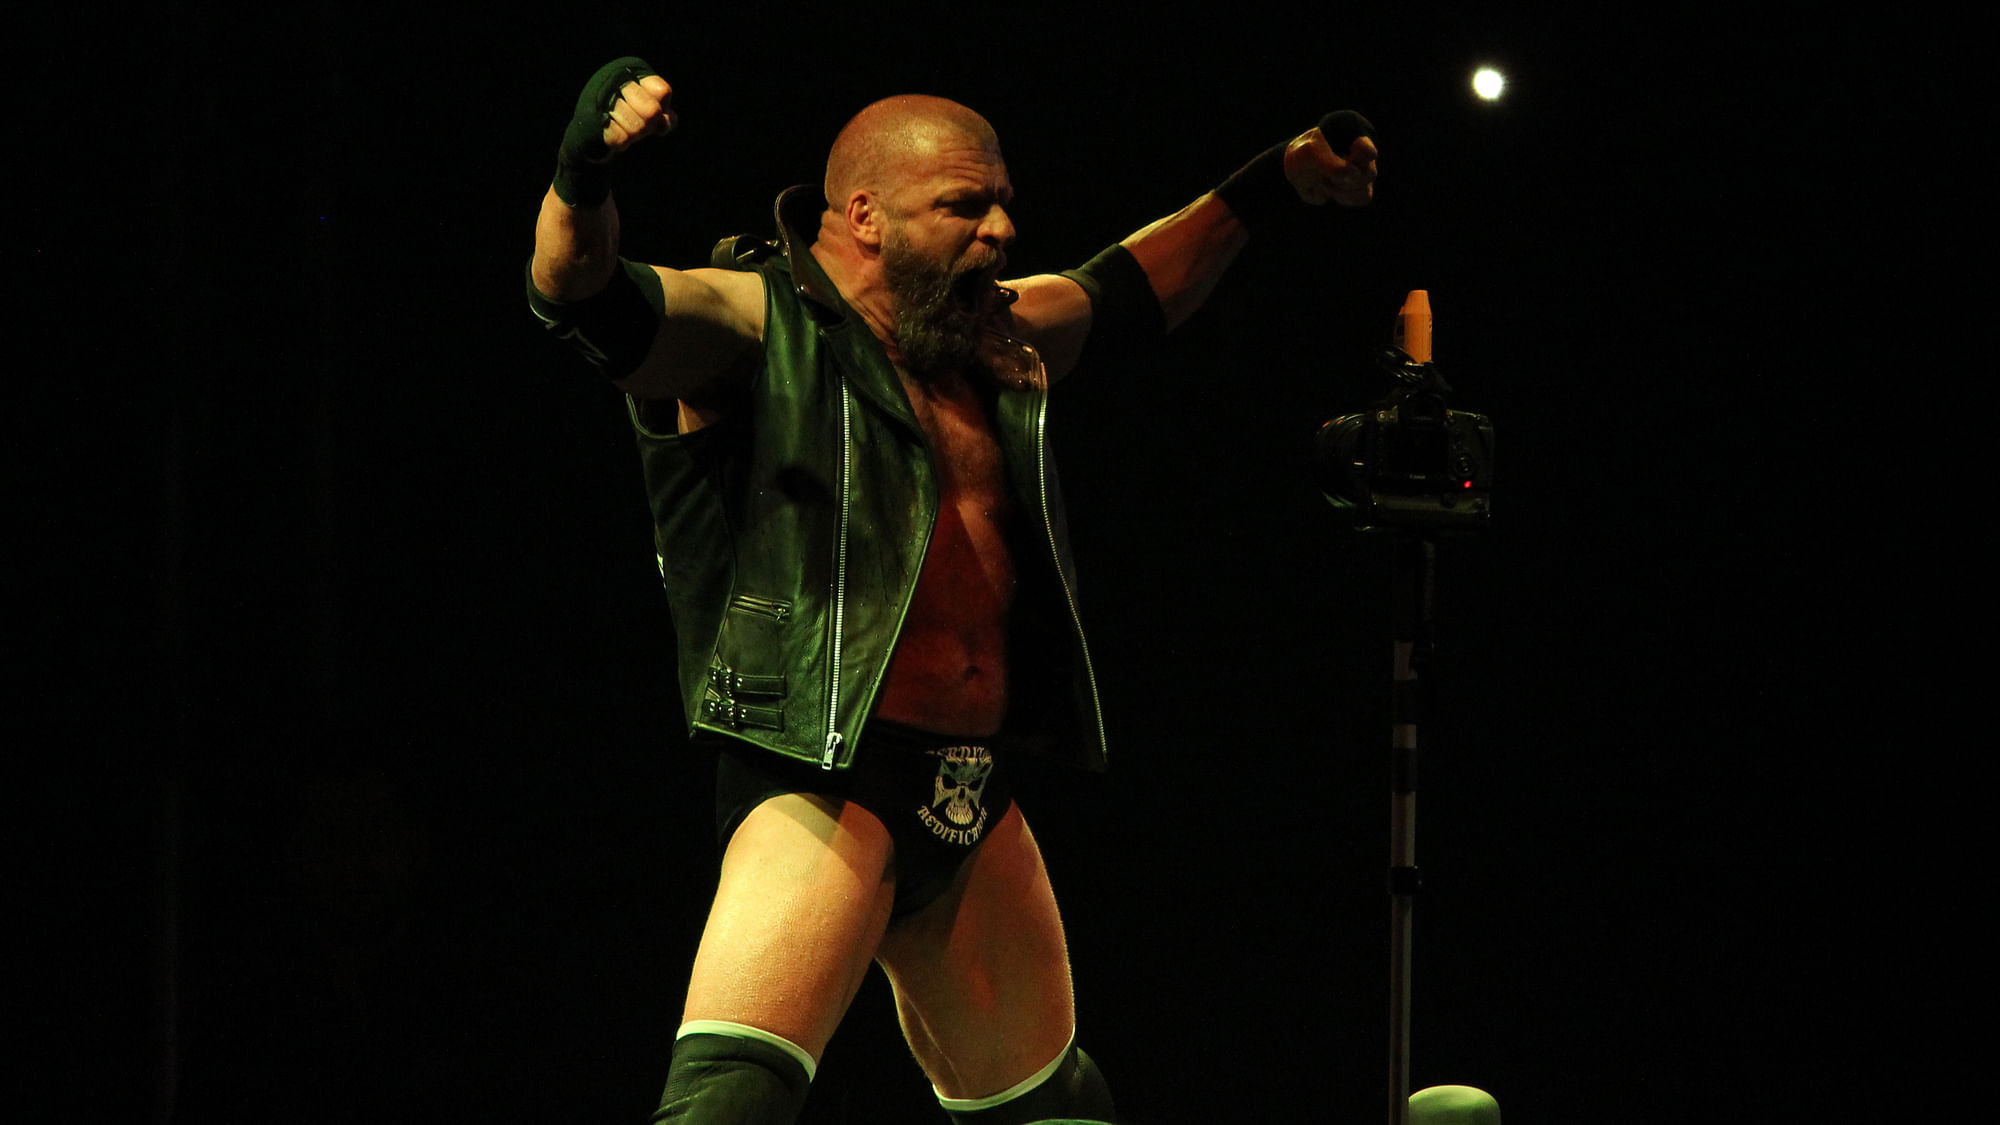 Triple H makes his entry before his fight against Jinder Mahal.